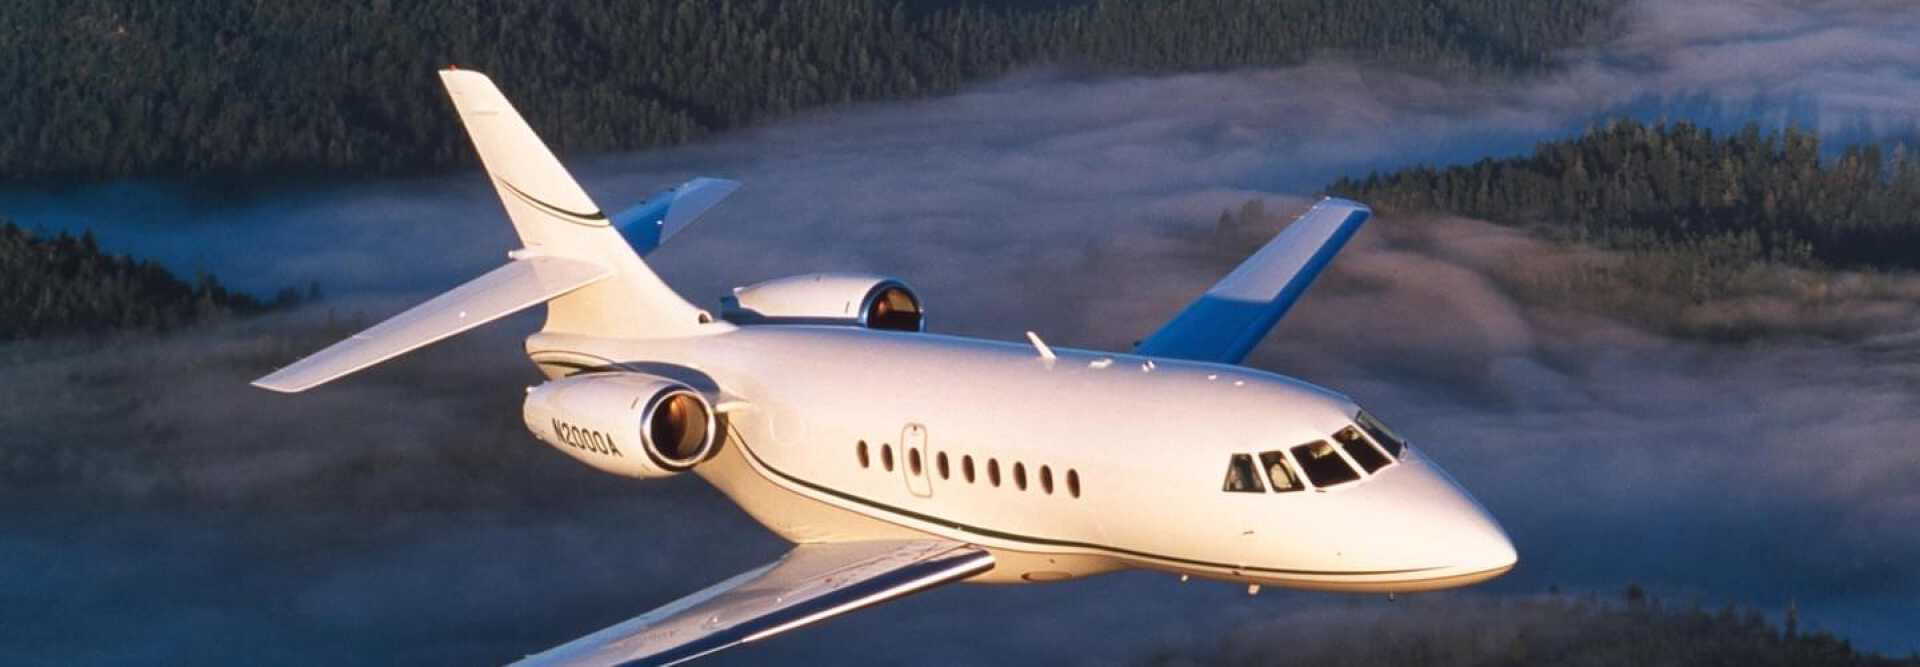 Large Business Jet Dassault Falcon 2000 to charter for private aviation intercontinental flights with LunaJets, impressive maximum speed